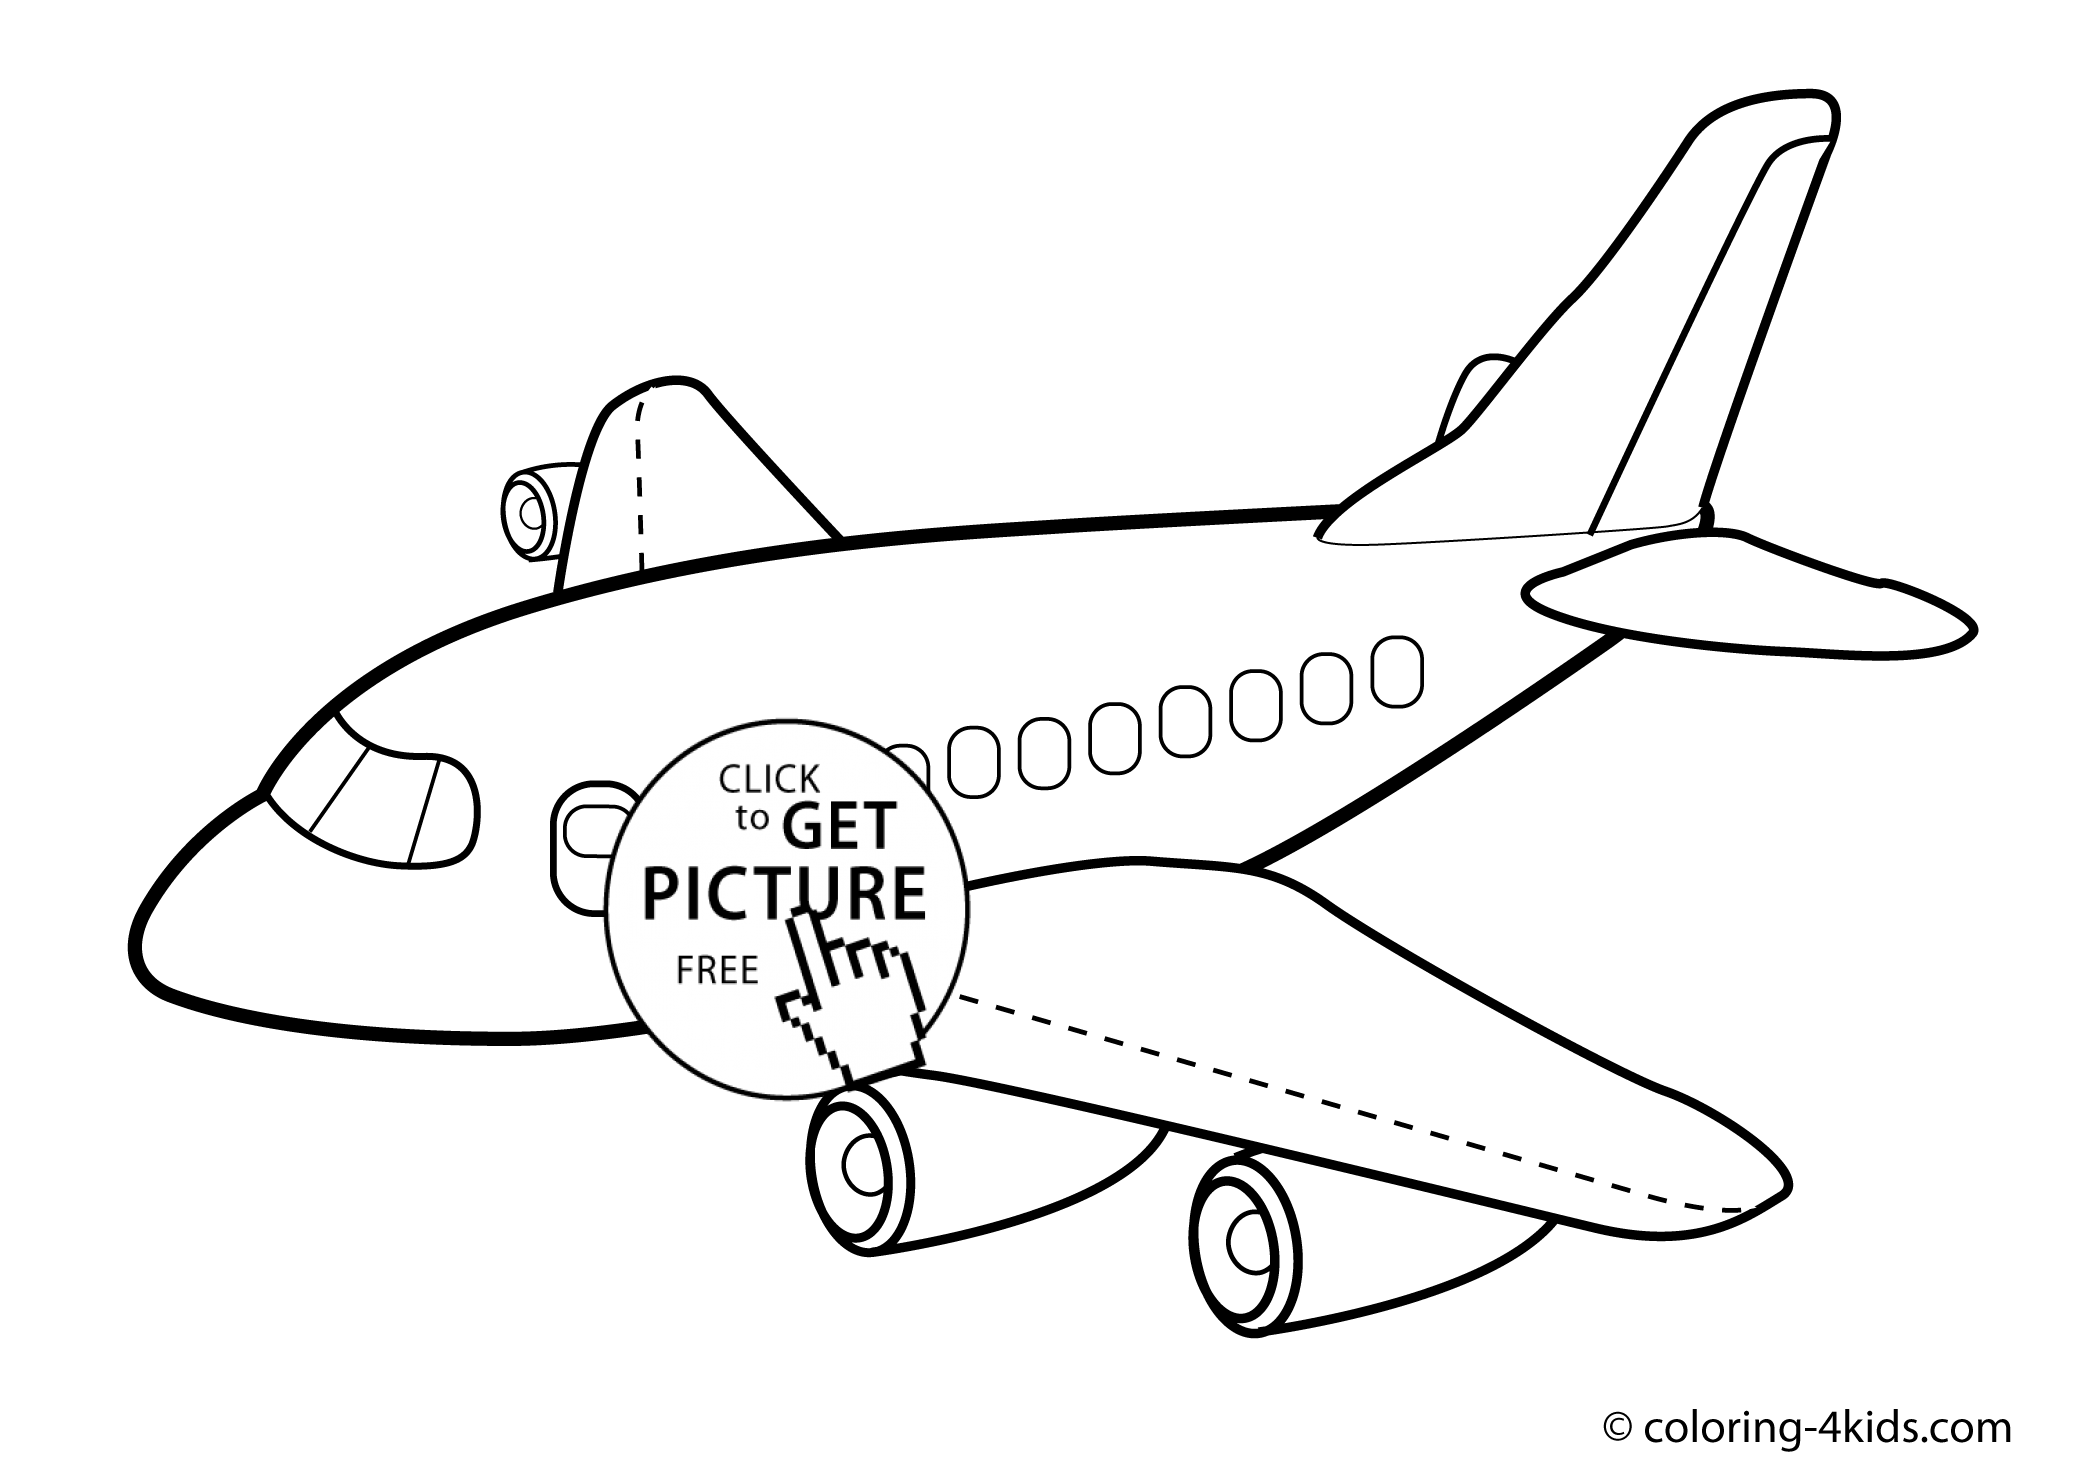 Air Plane 9 For Kids Coloring Page